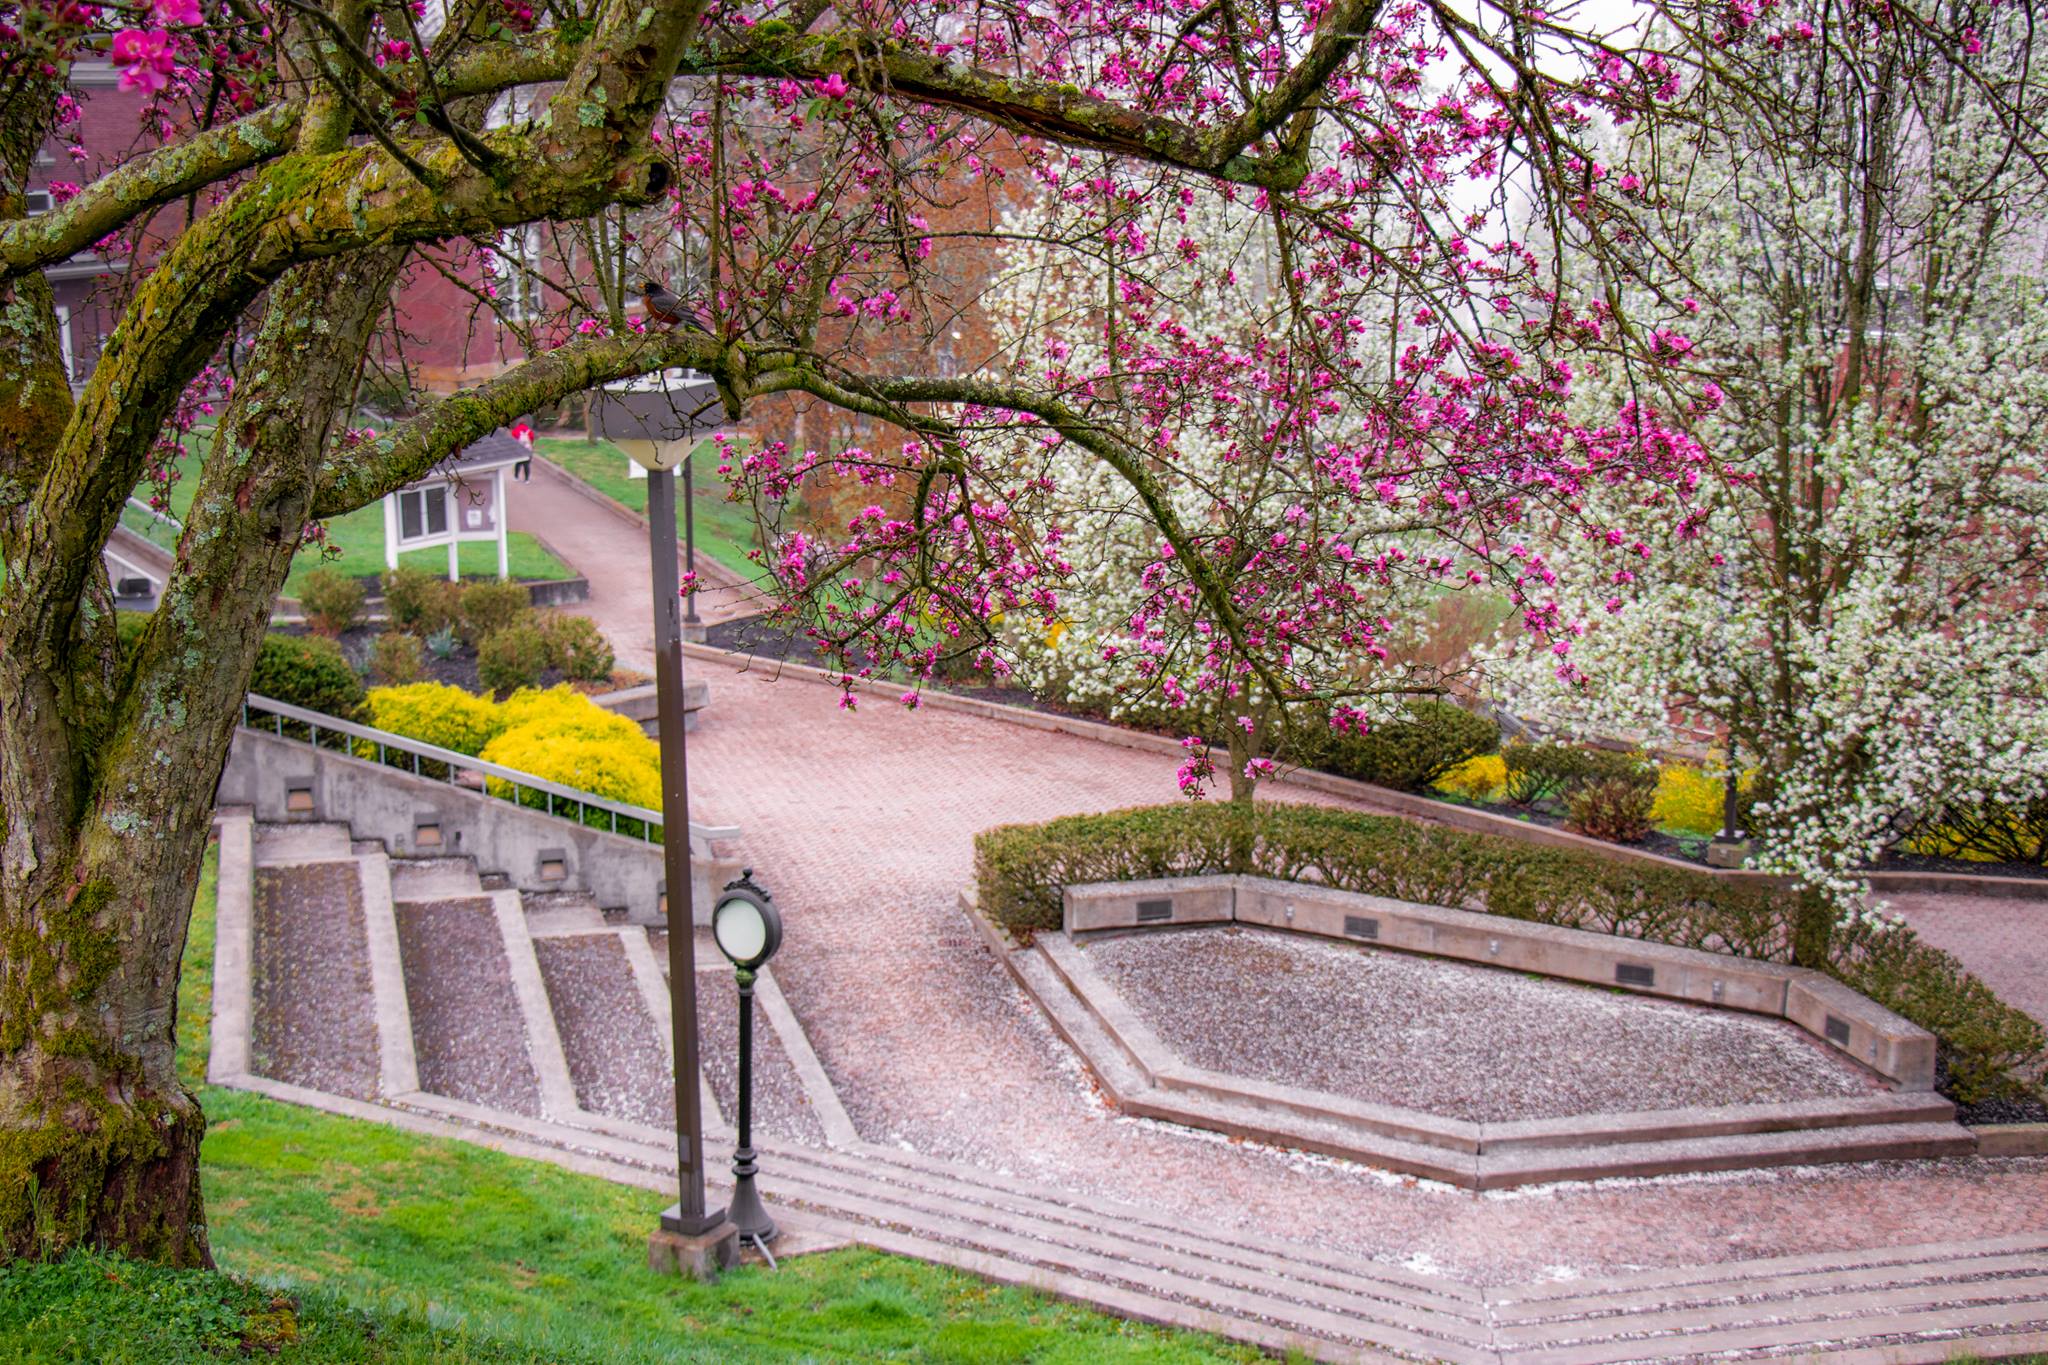 A courtyard and amphitheater are framed by bright pink and snow white blossoms hanging from trees covered in moss. Blossom petals cover much of the courtyard and bushes surrounding the area are vivid yellow.